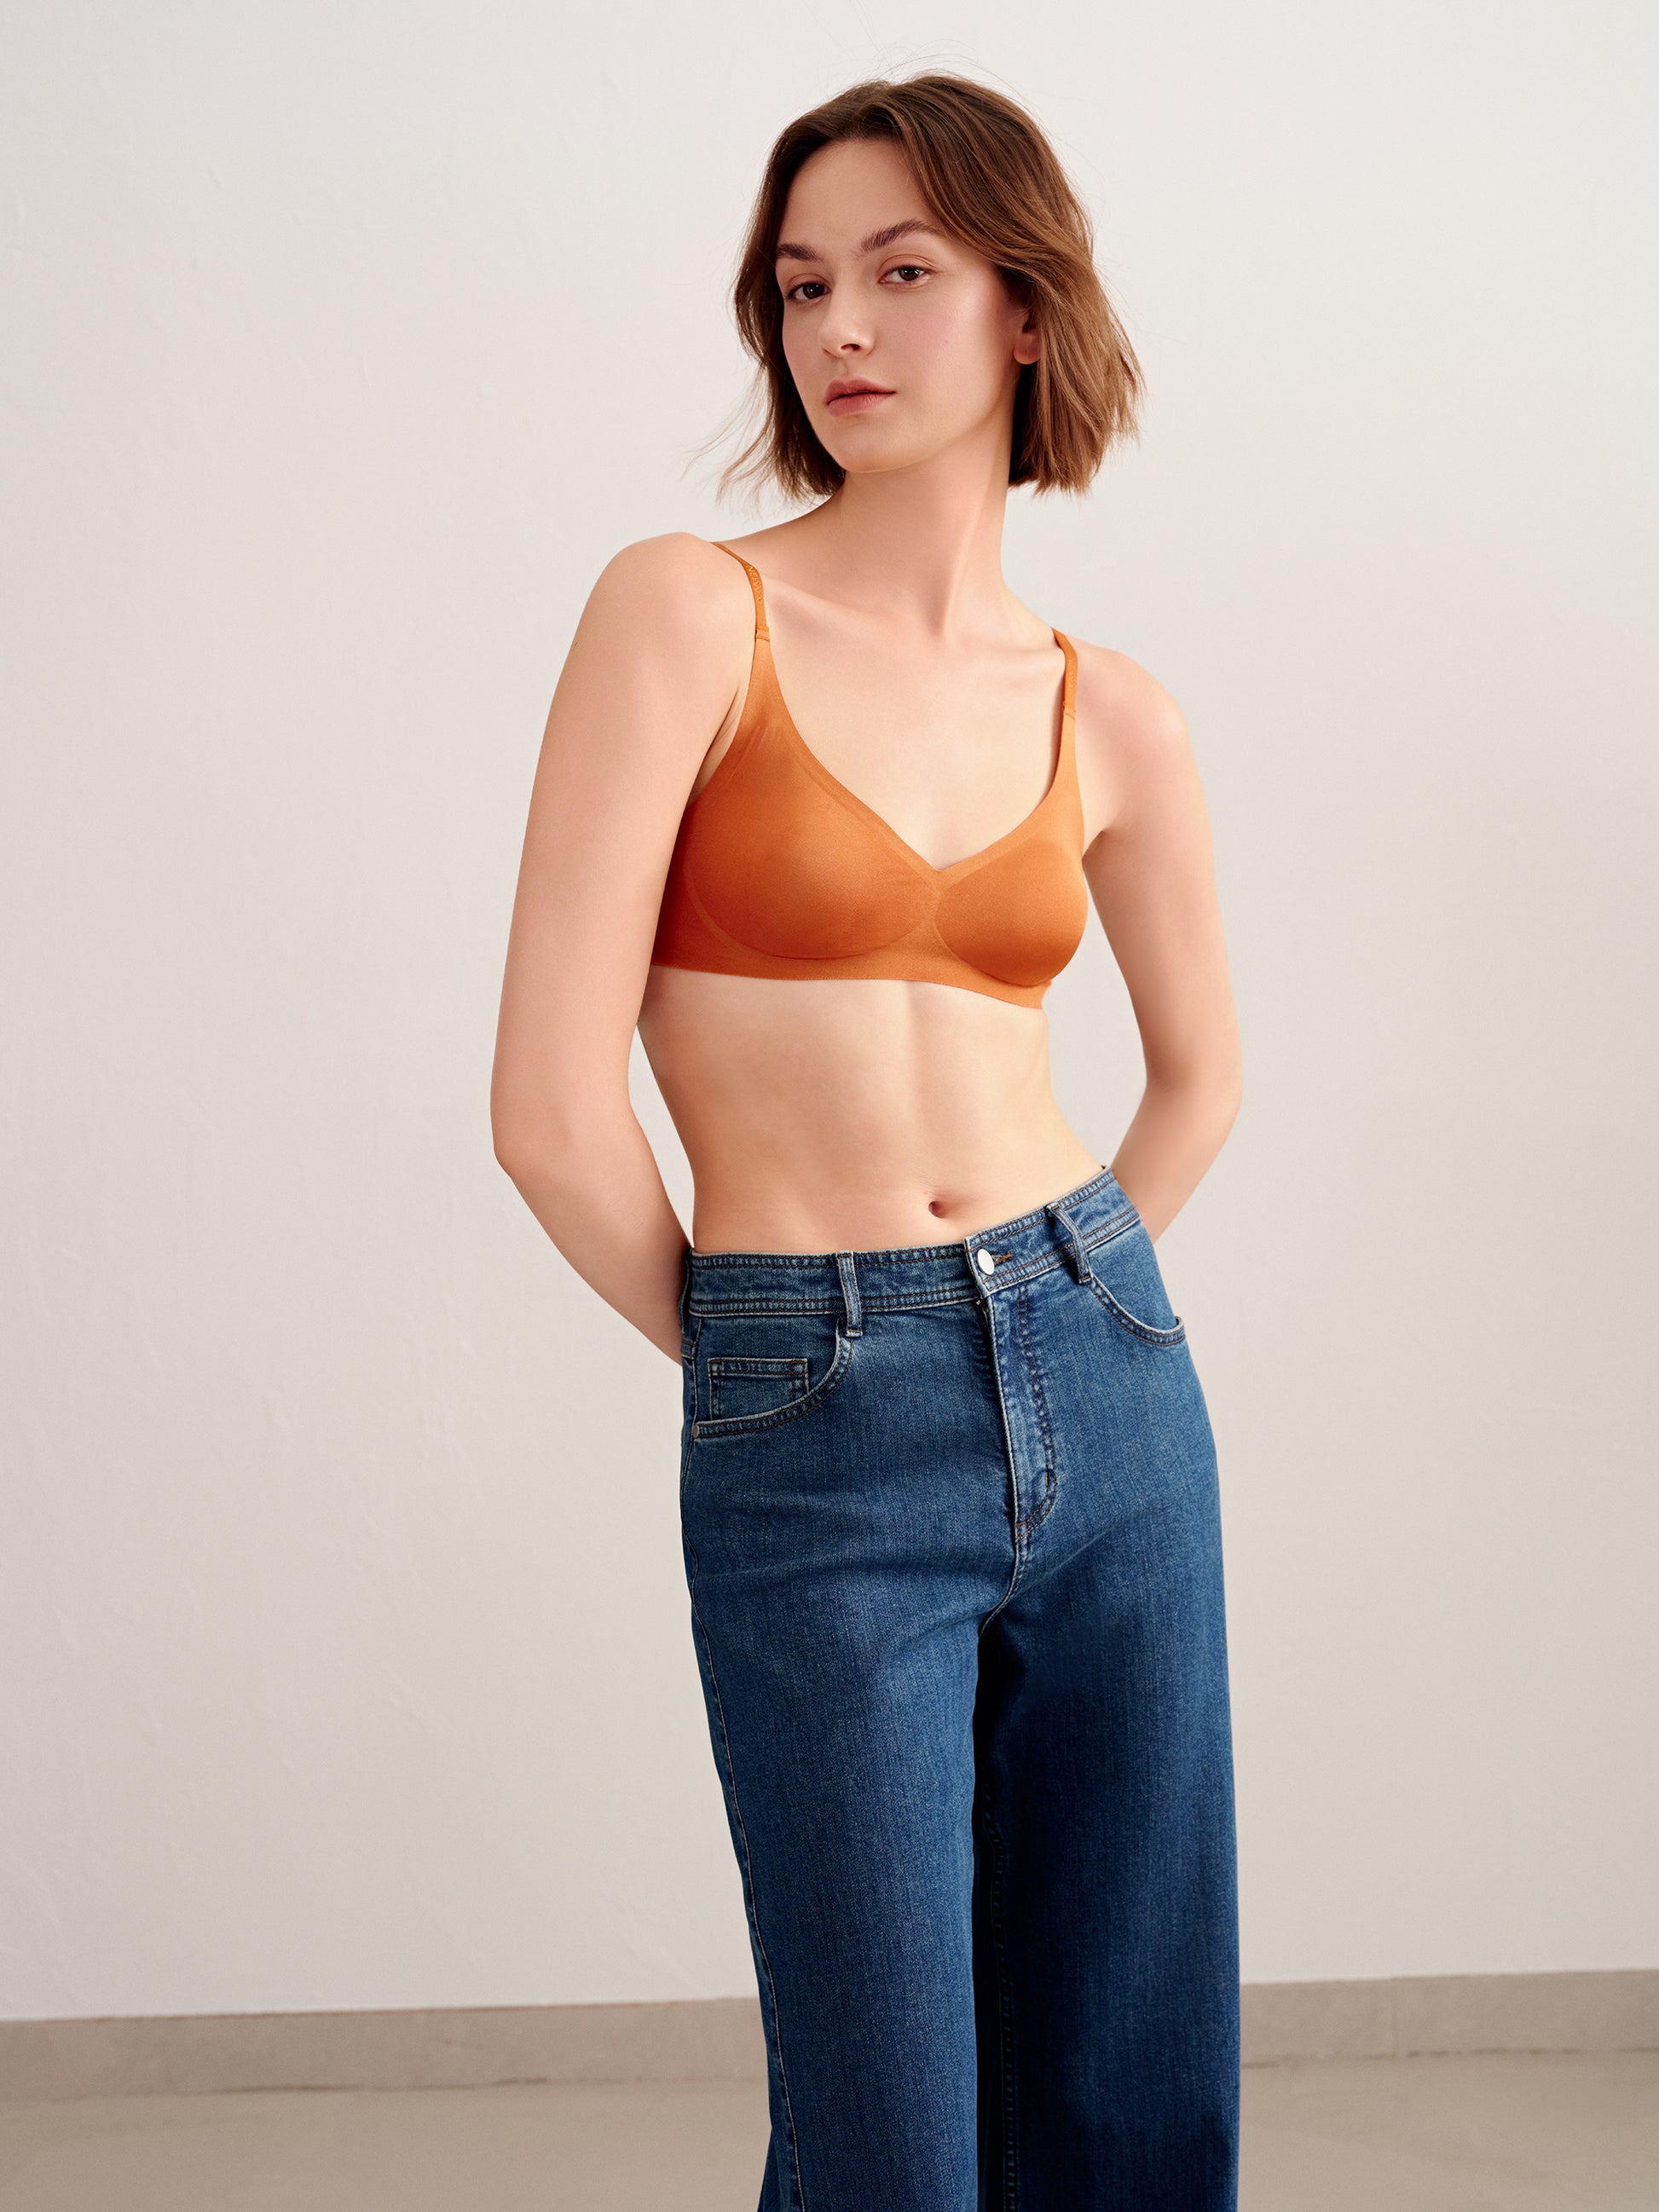 woman in orange bra and jeans